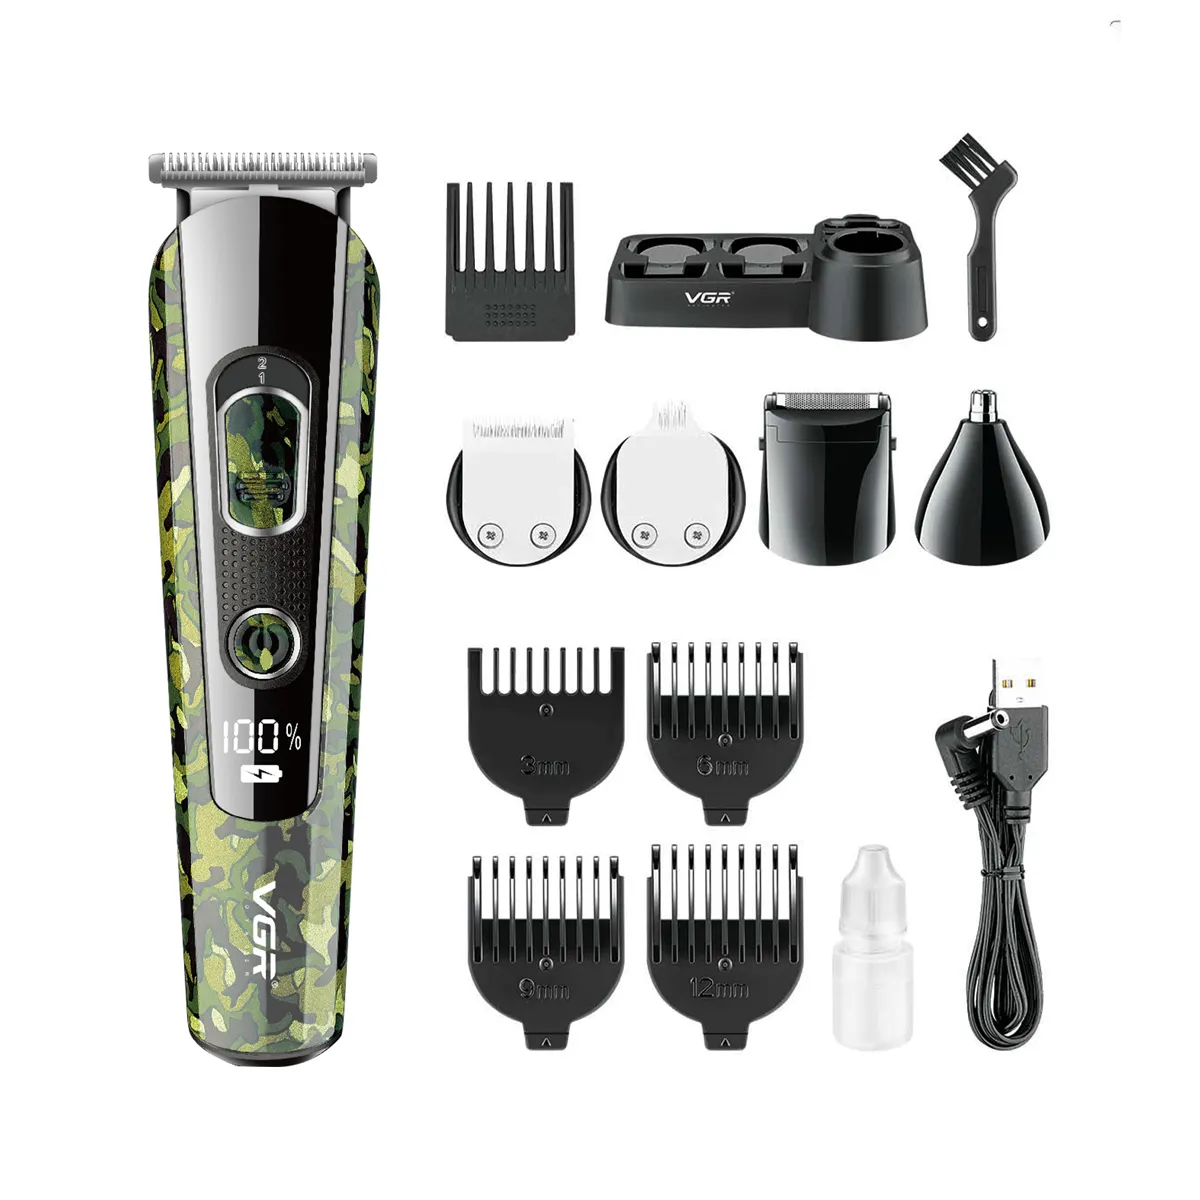 VGR V-102 Mens Grooming Kits 5 in 1 Beard Shaver Rechargeable Professional Electric Hair Clipper Body and Nose Trimmer for Men